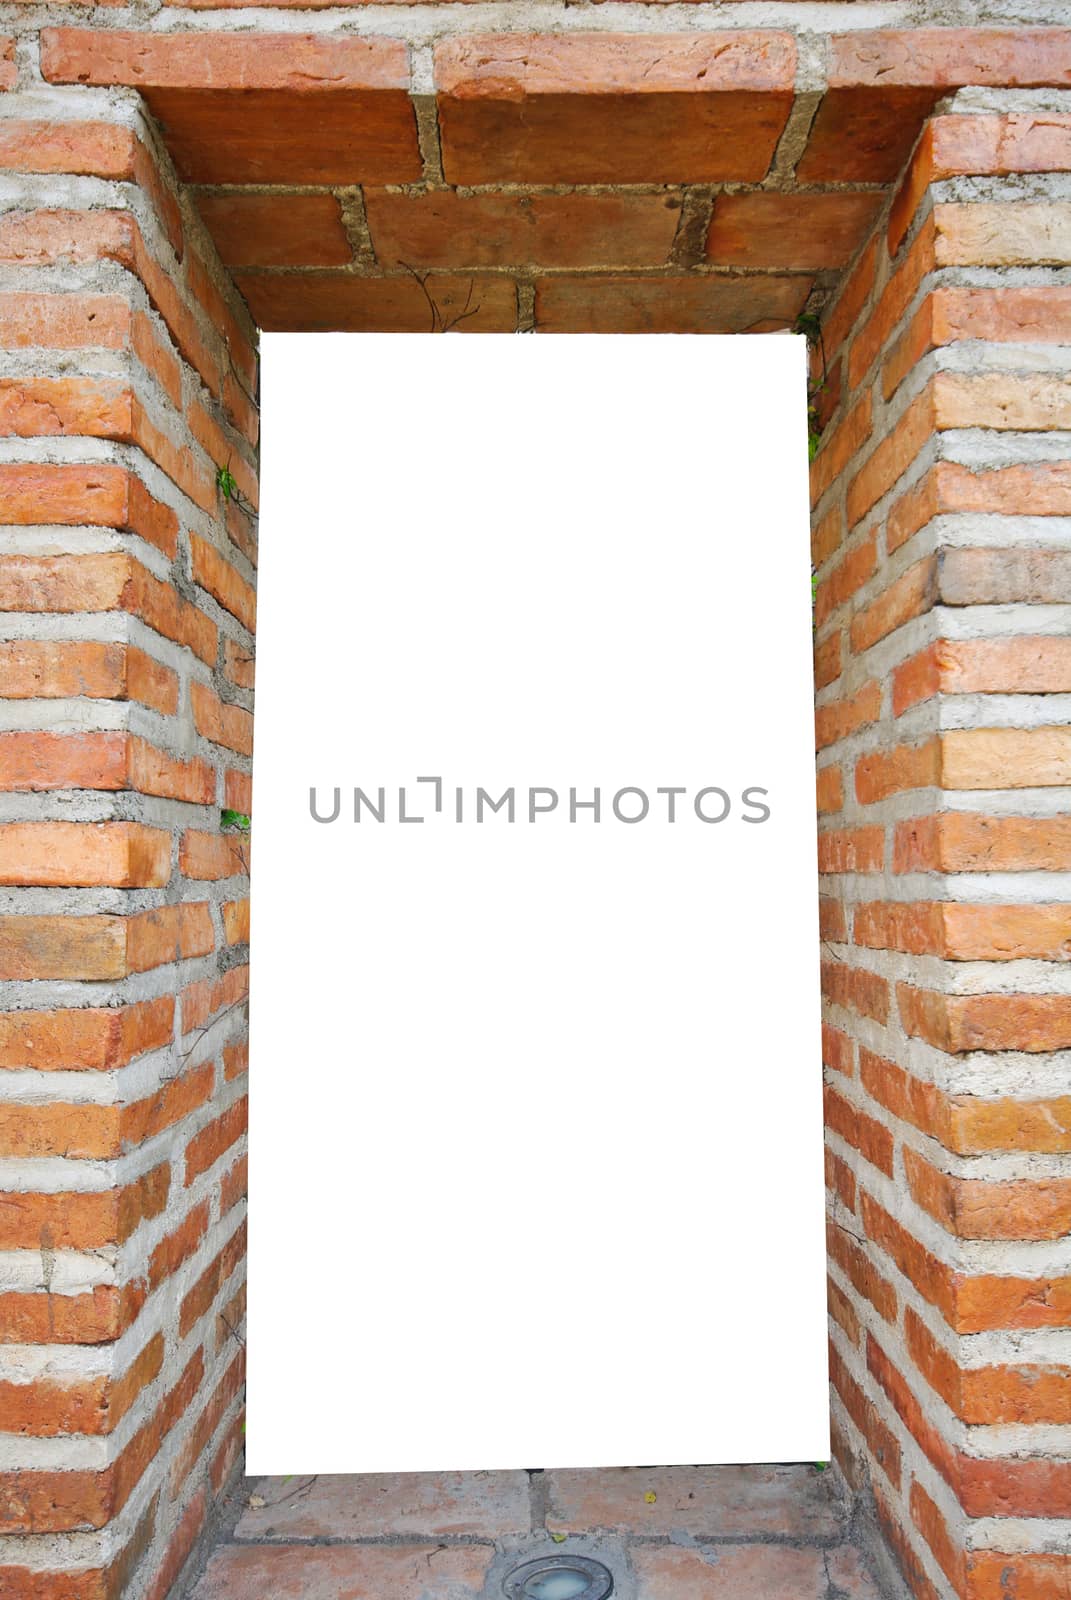 white hole in old wall, brick frame